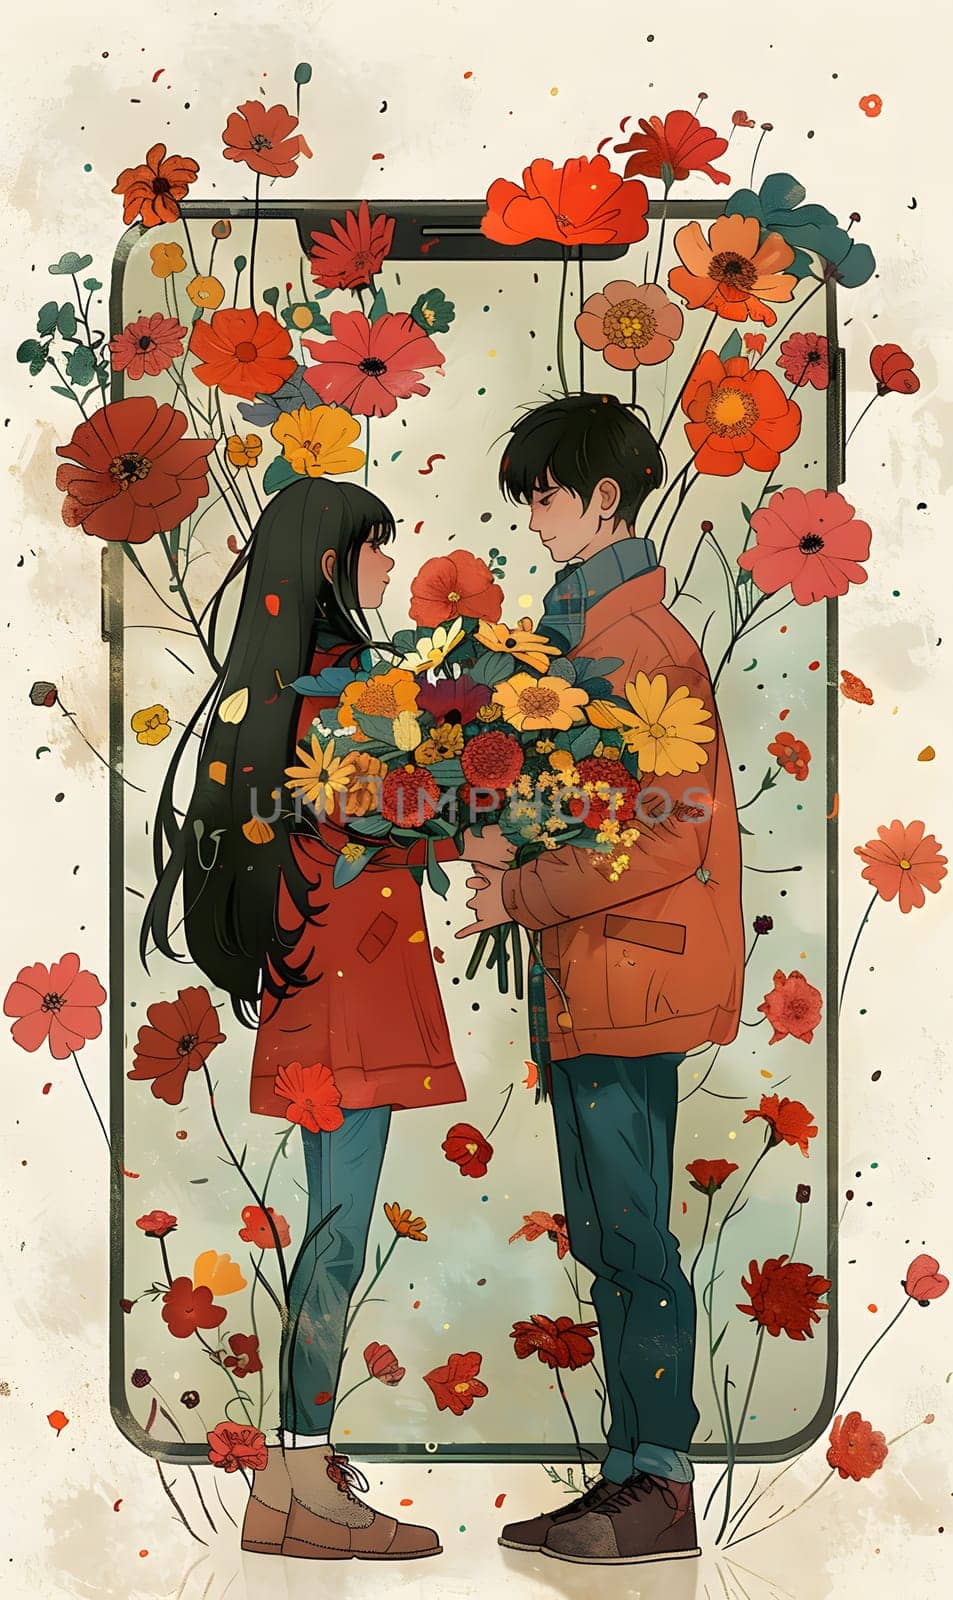 A boy and a girl stand by a cell phone amidst flowers by Nadtochiy